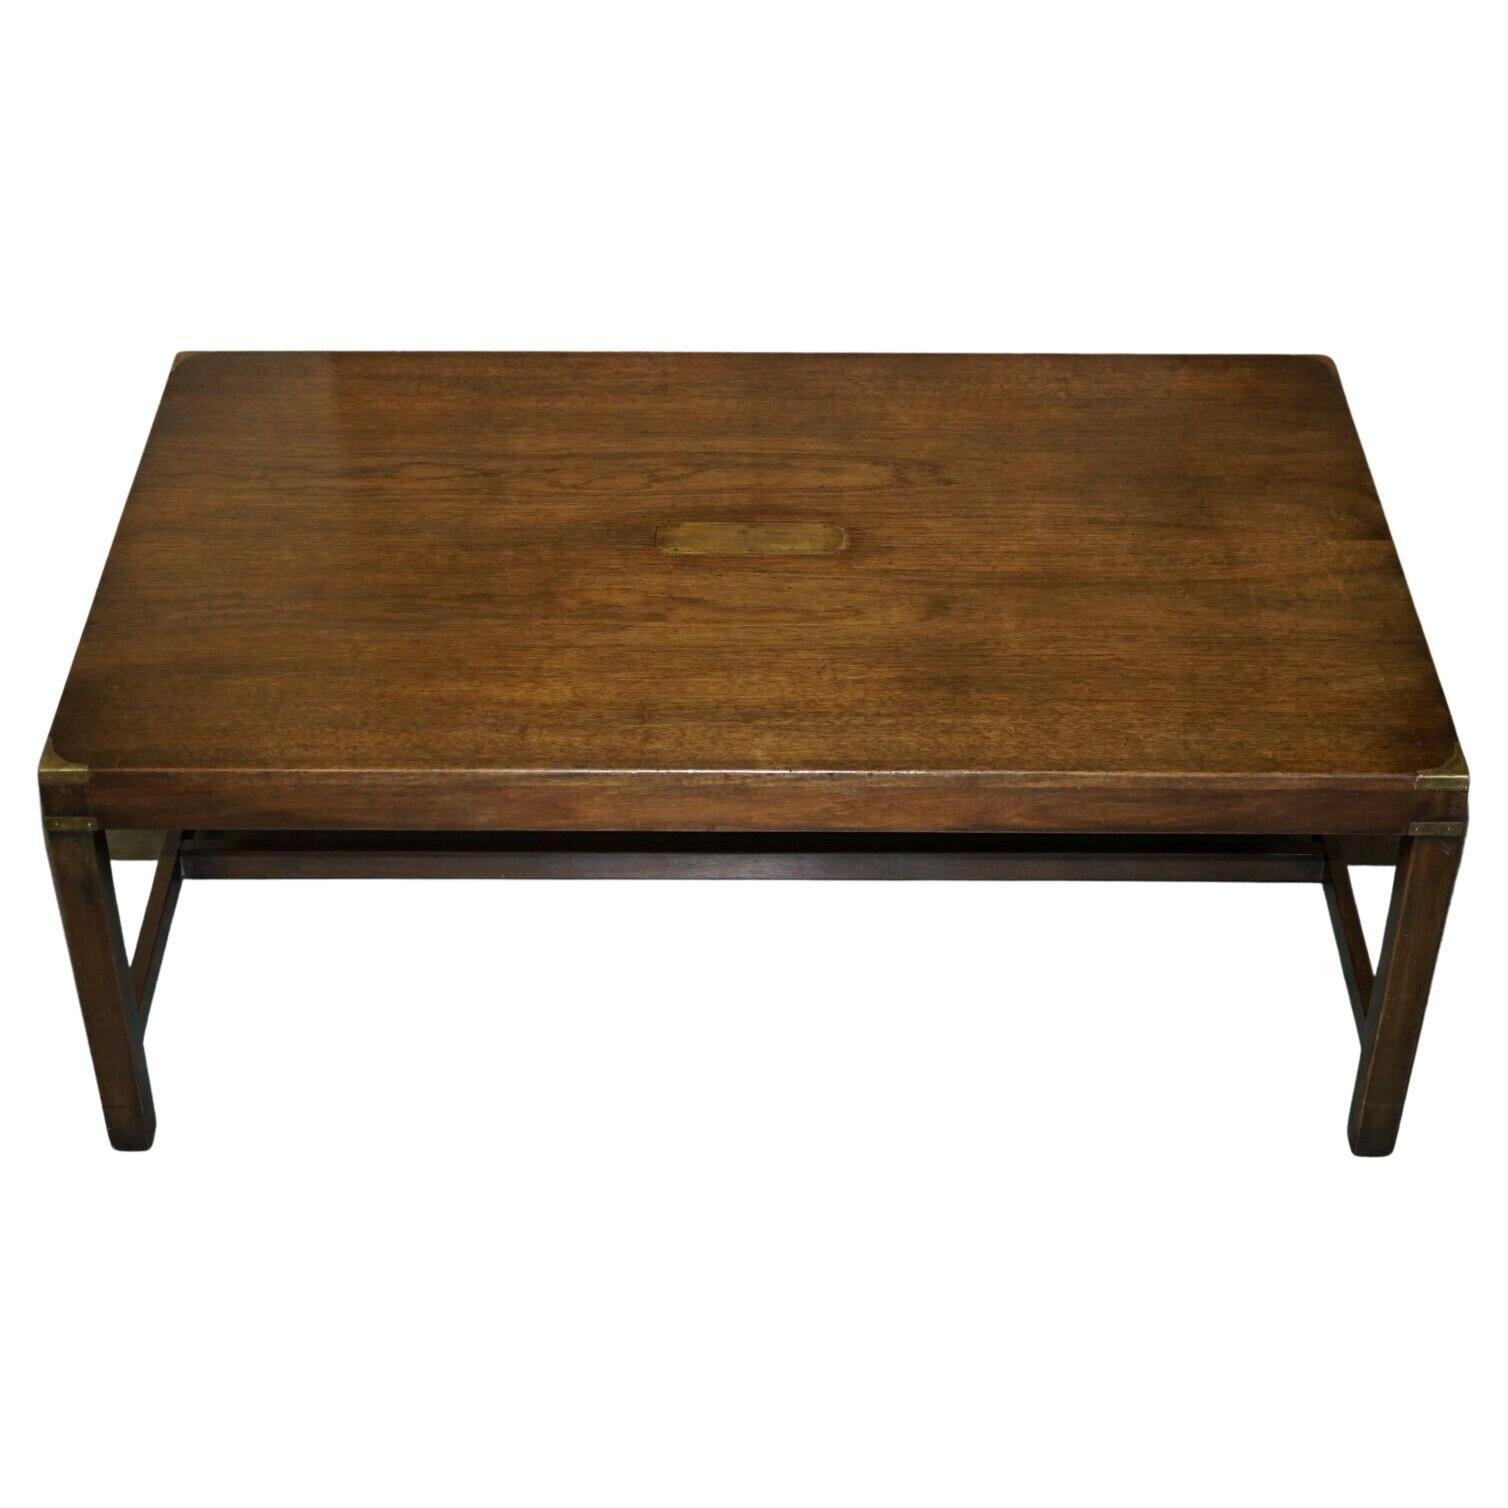 Stunning Extra Large Harrods Kennedy Military Campaign Coffee Table Hardwood